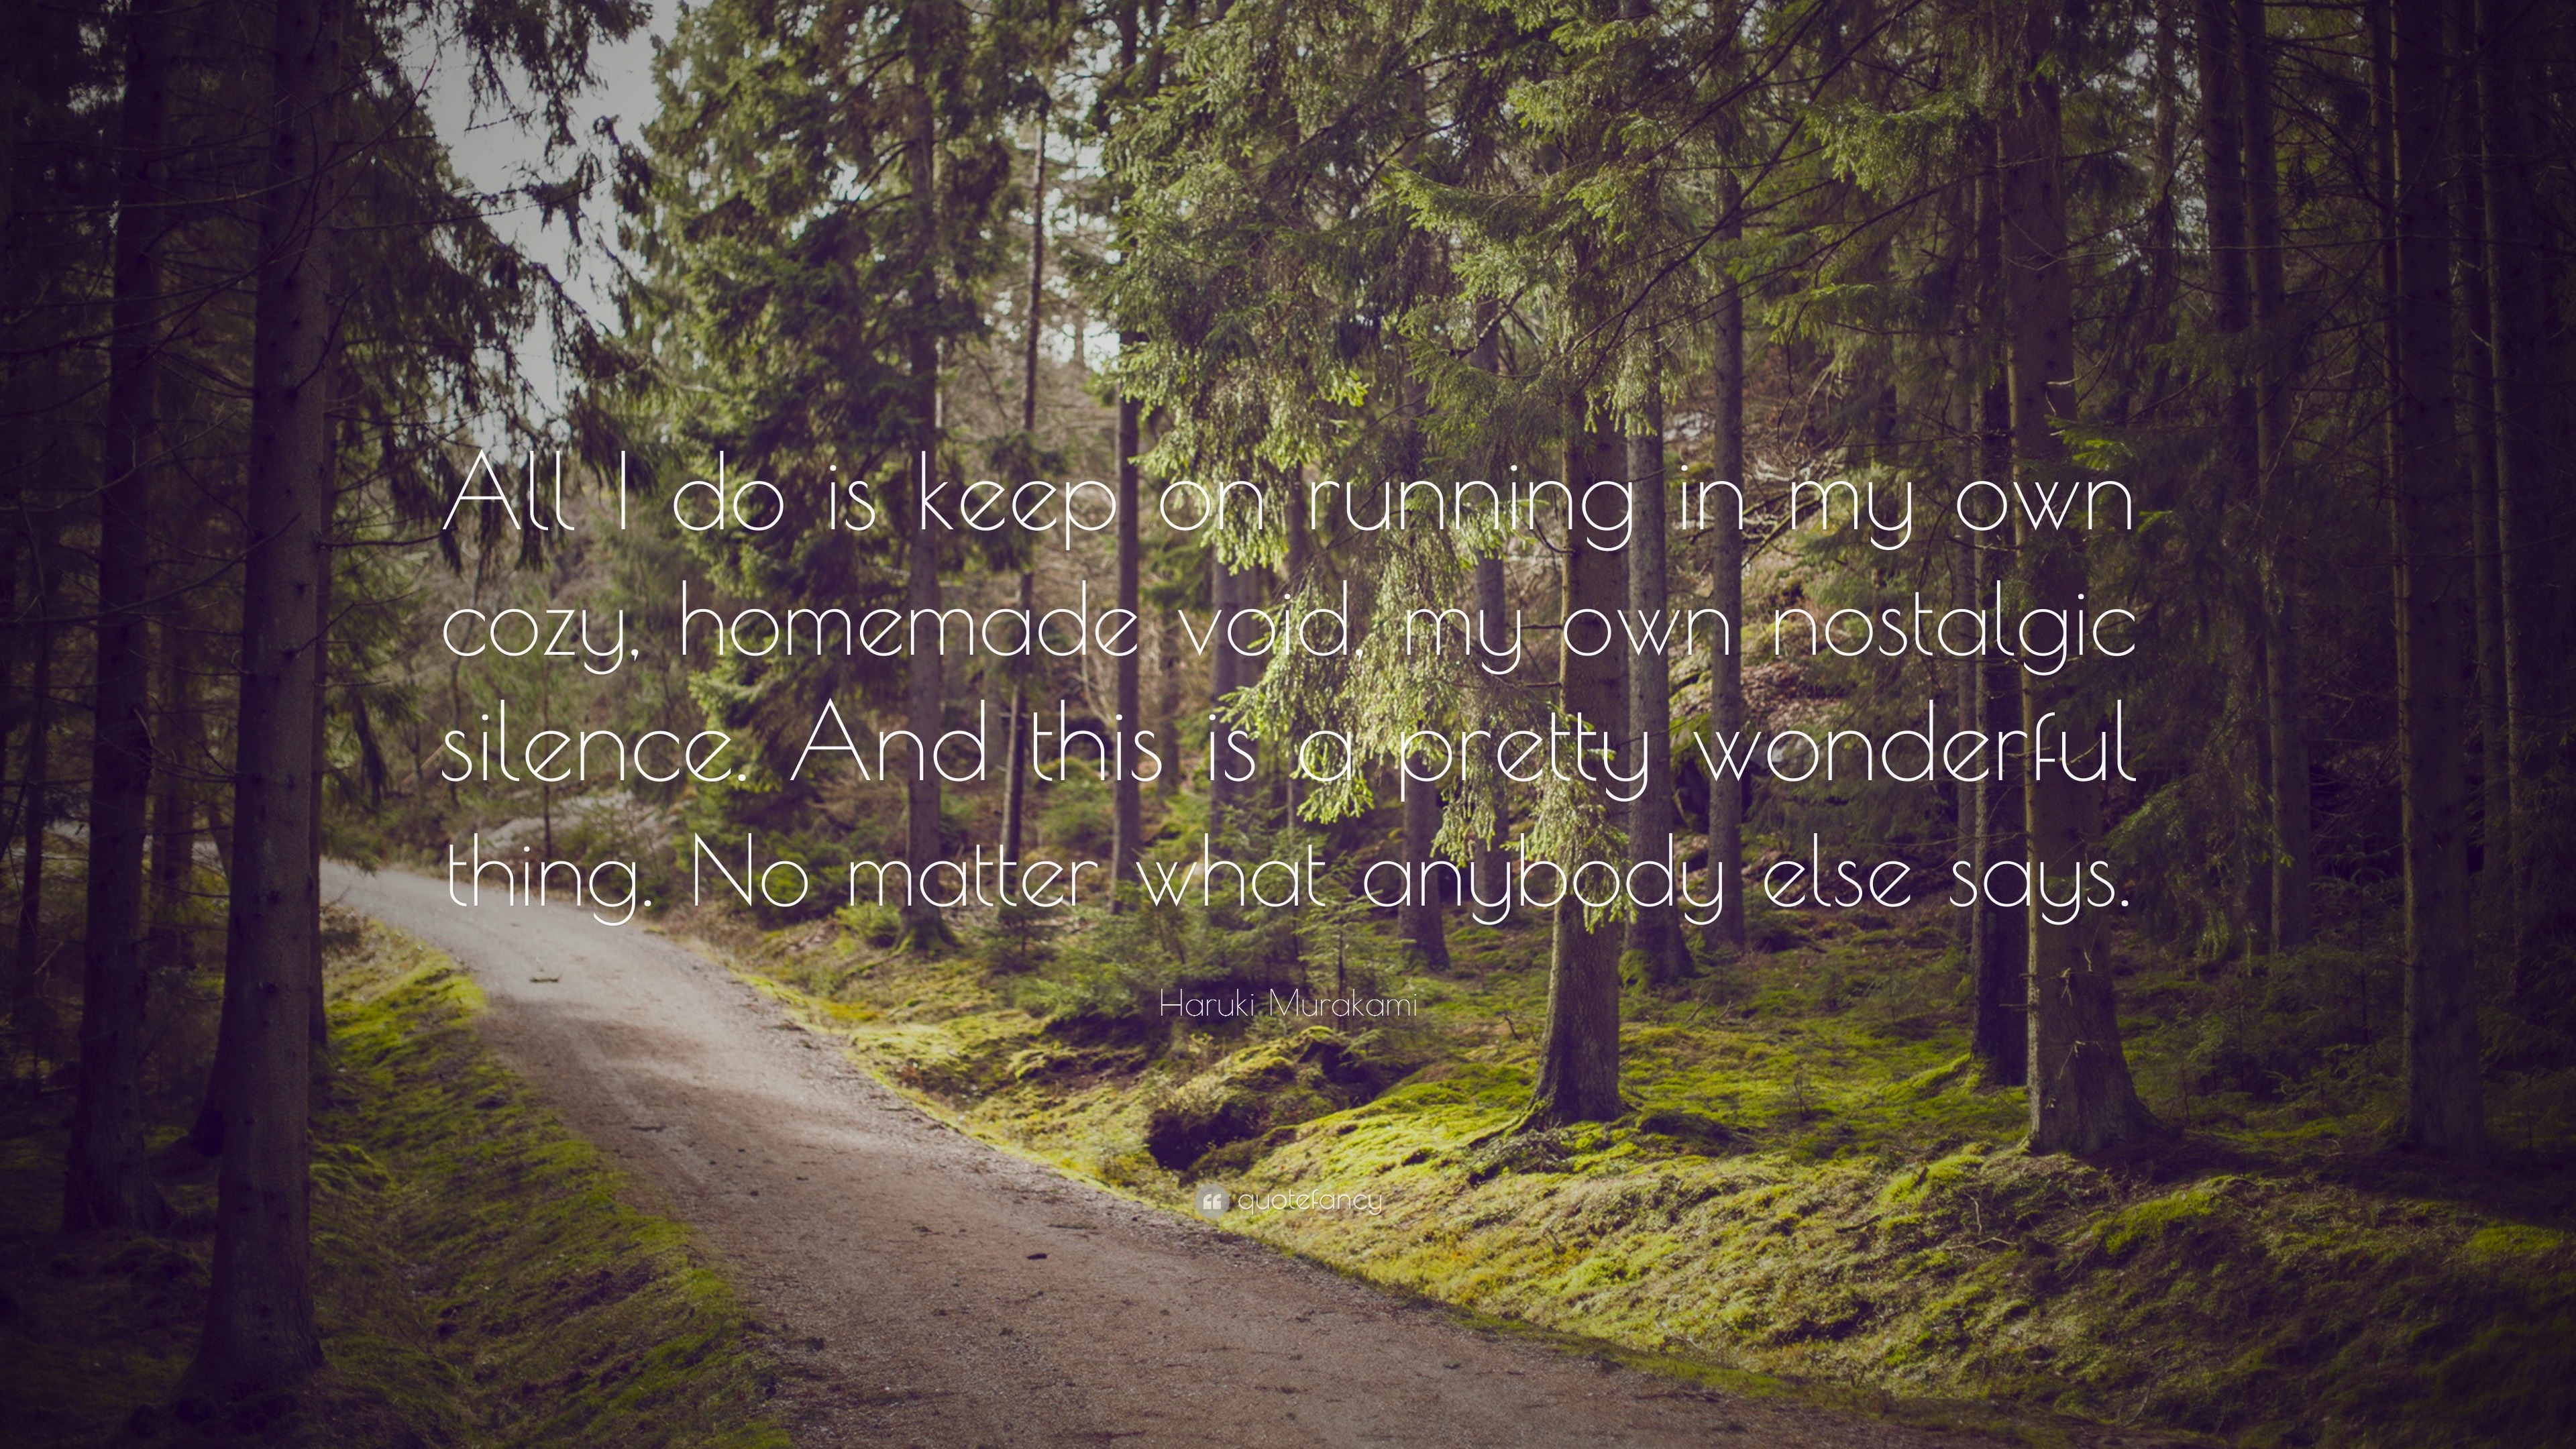 Running Quotes 100 Wallpapers Quotefancy